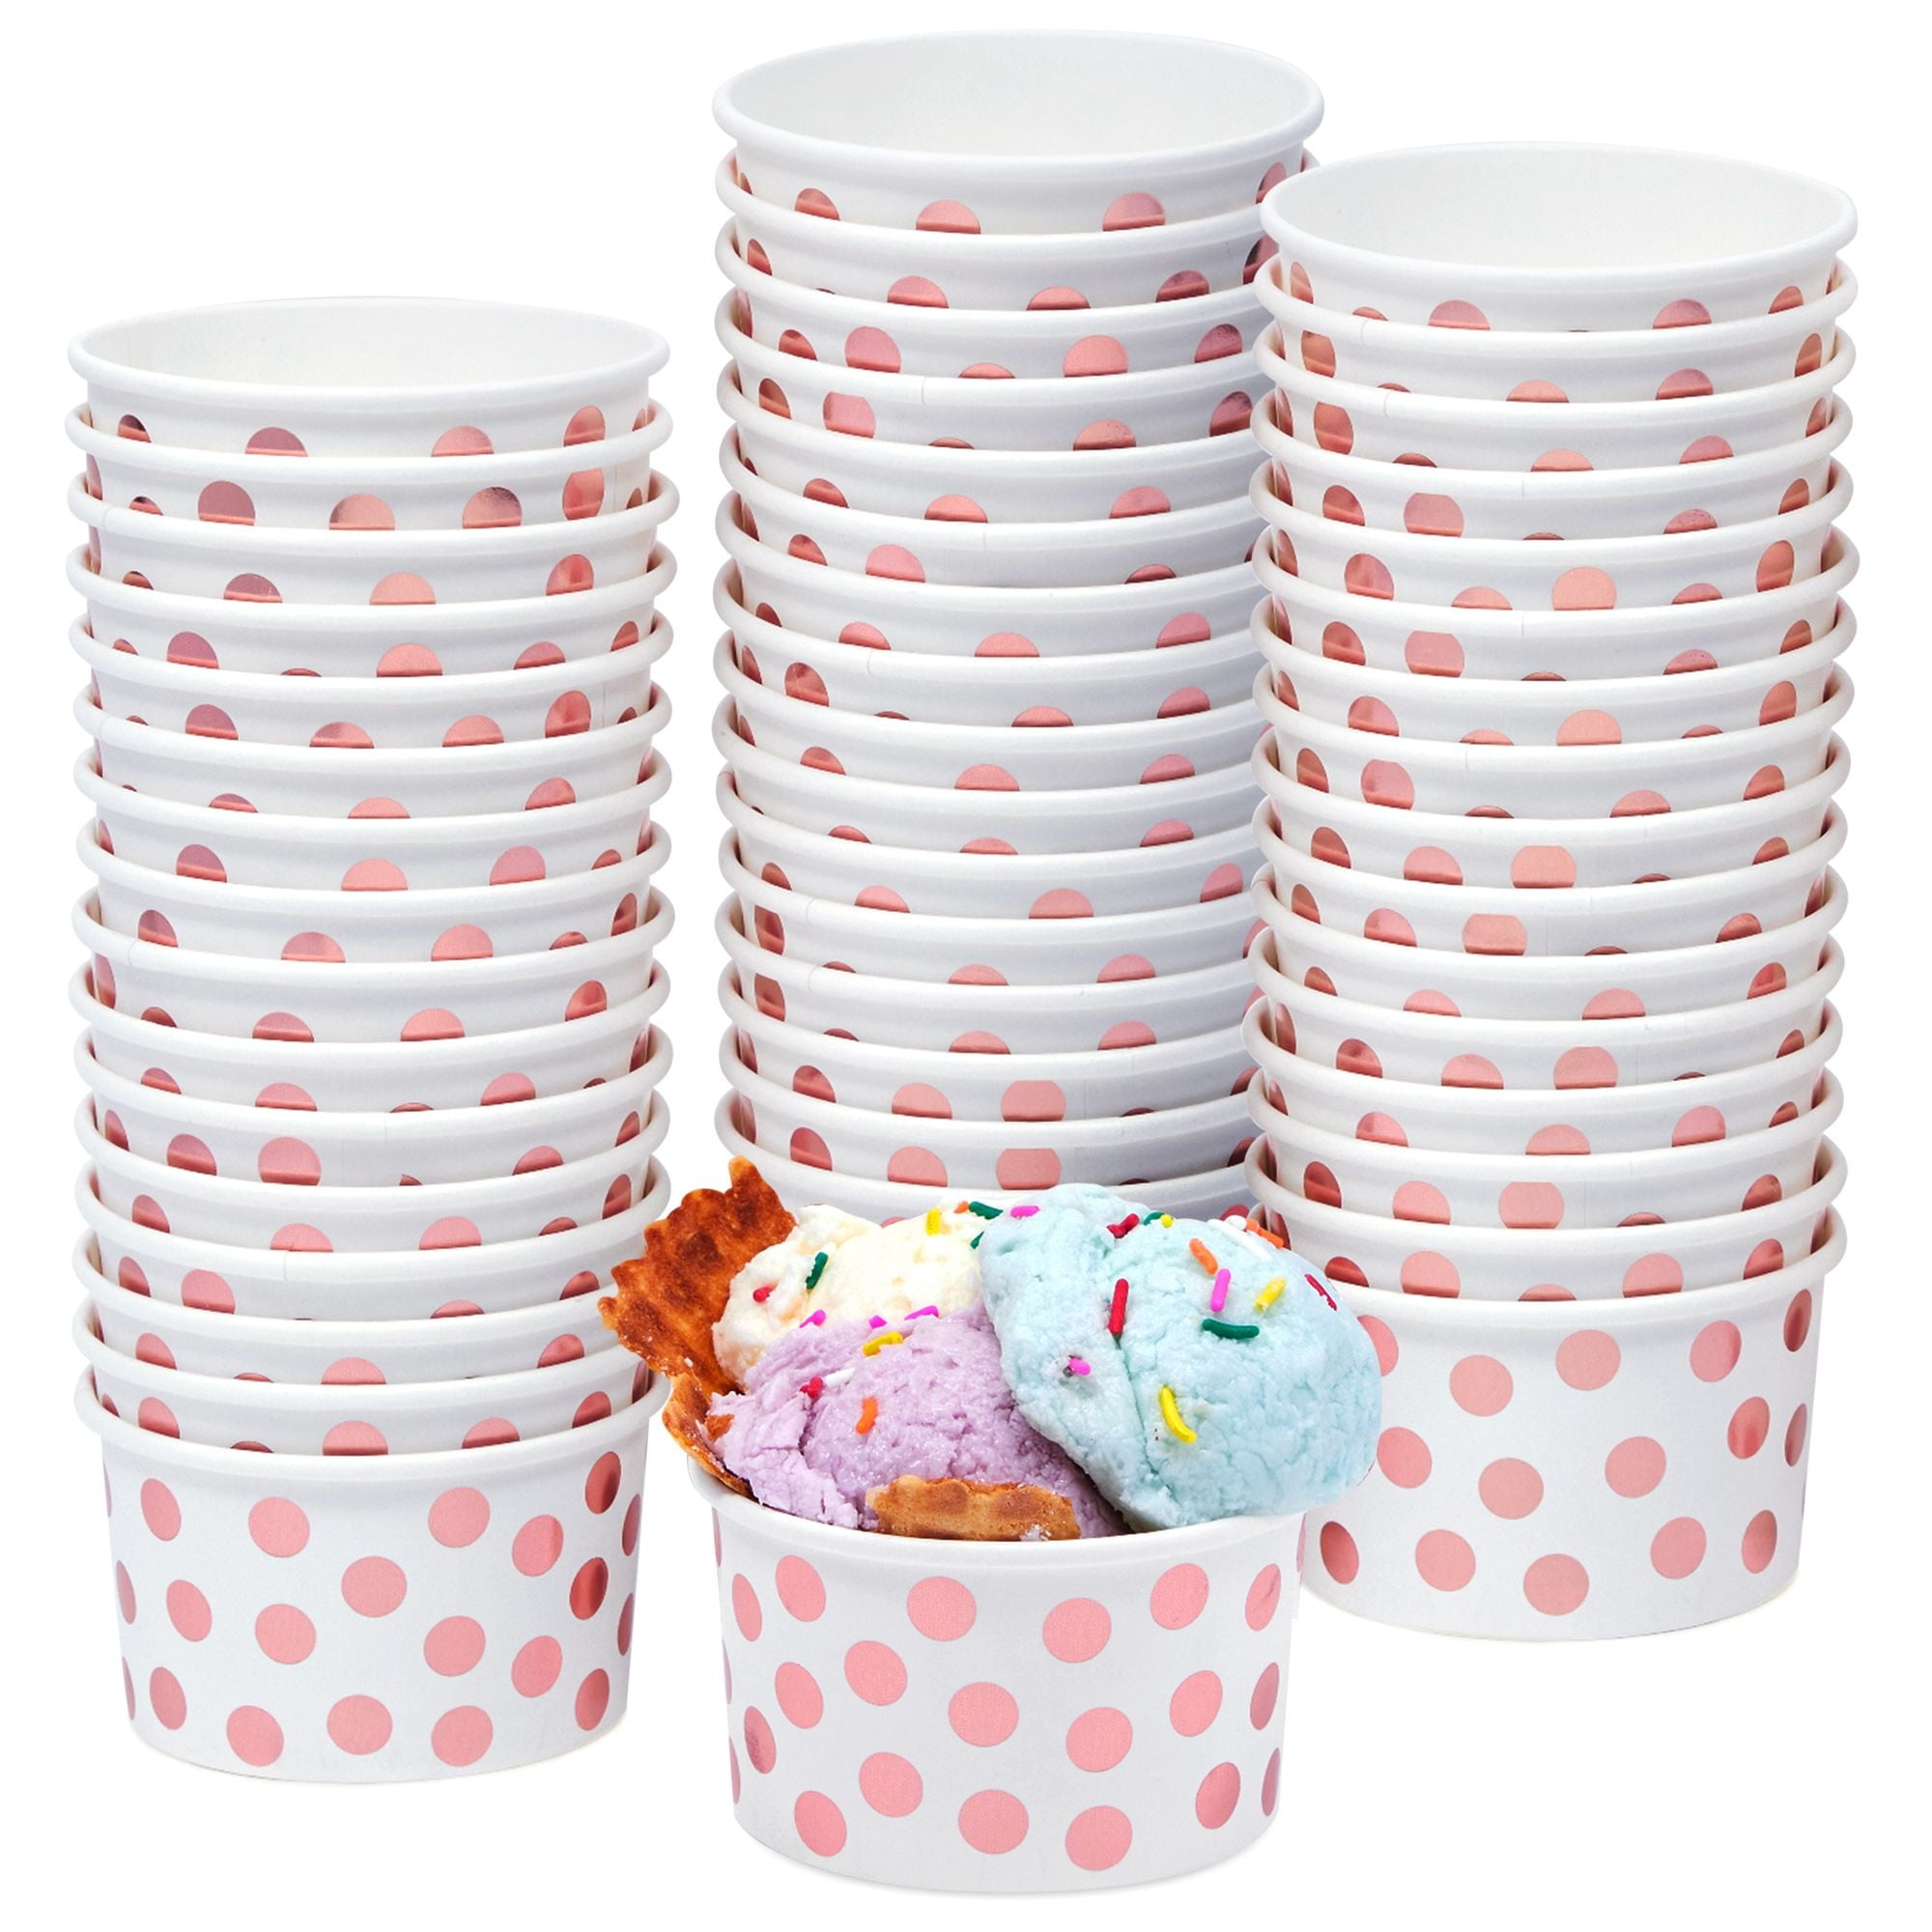 Ocmoiy 4 Oz Disposable Ice Cream Cups with Lids and Spoons for Freezer, 50  Pack Paper Dessert Cups Ice Cream Bowls Snack Containers Cups for Jello